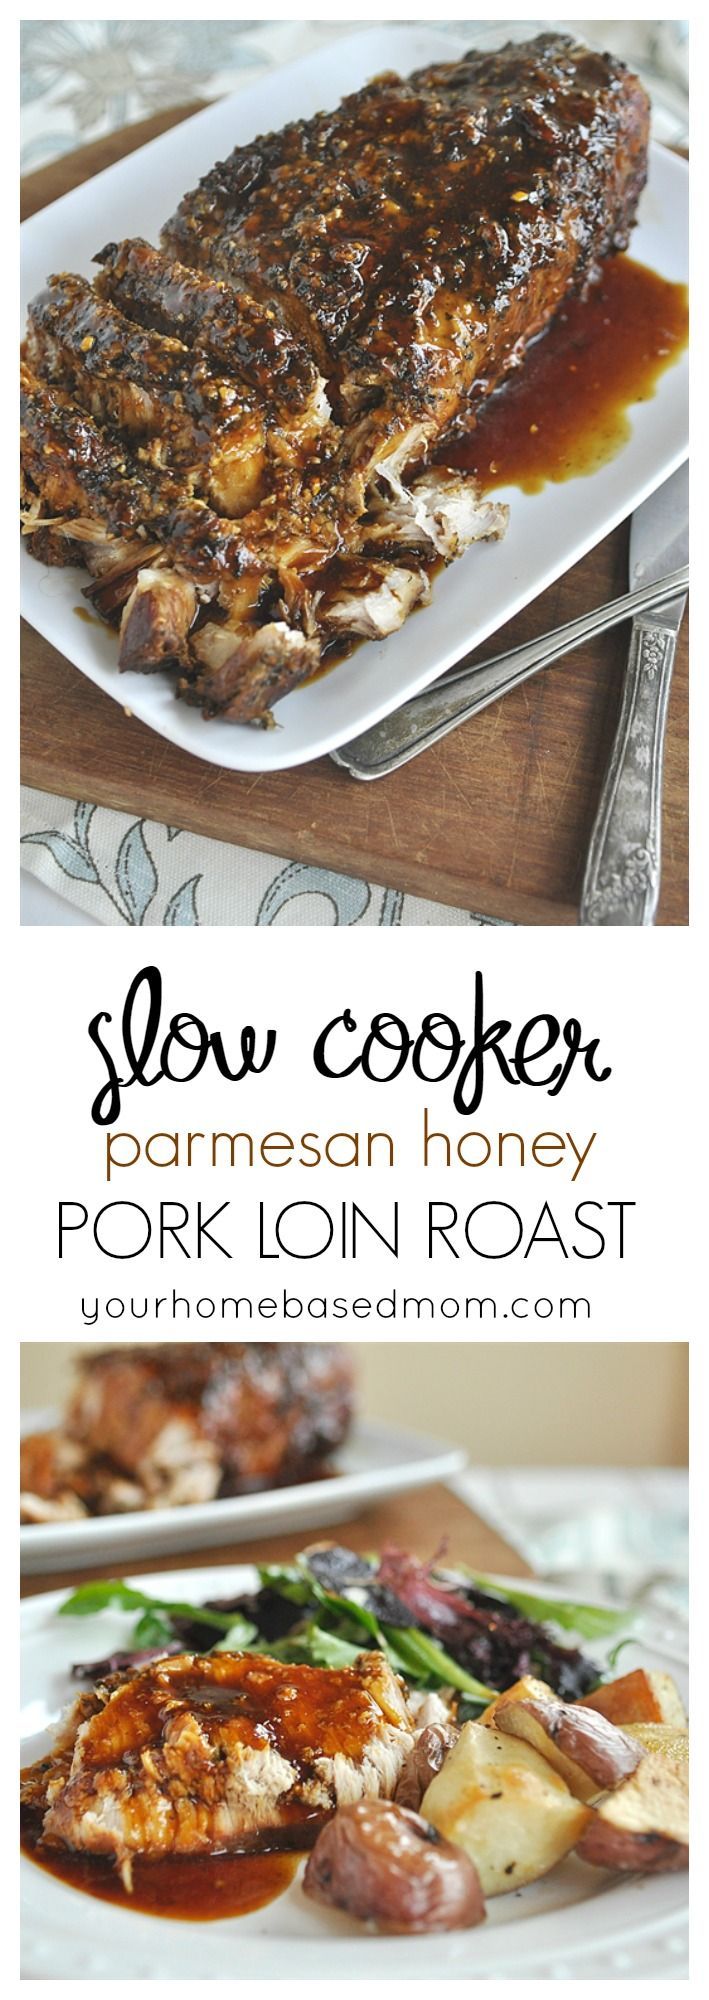 Slow Cooker Parmesan Honey Pork Loin Roast is one of the most pinned recipes on my site!  Easy and del